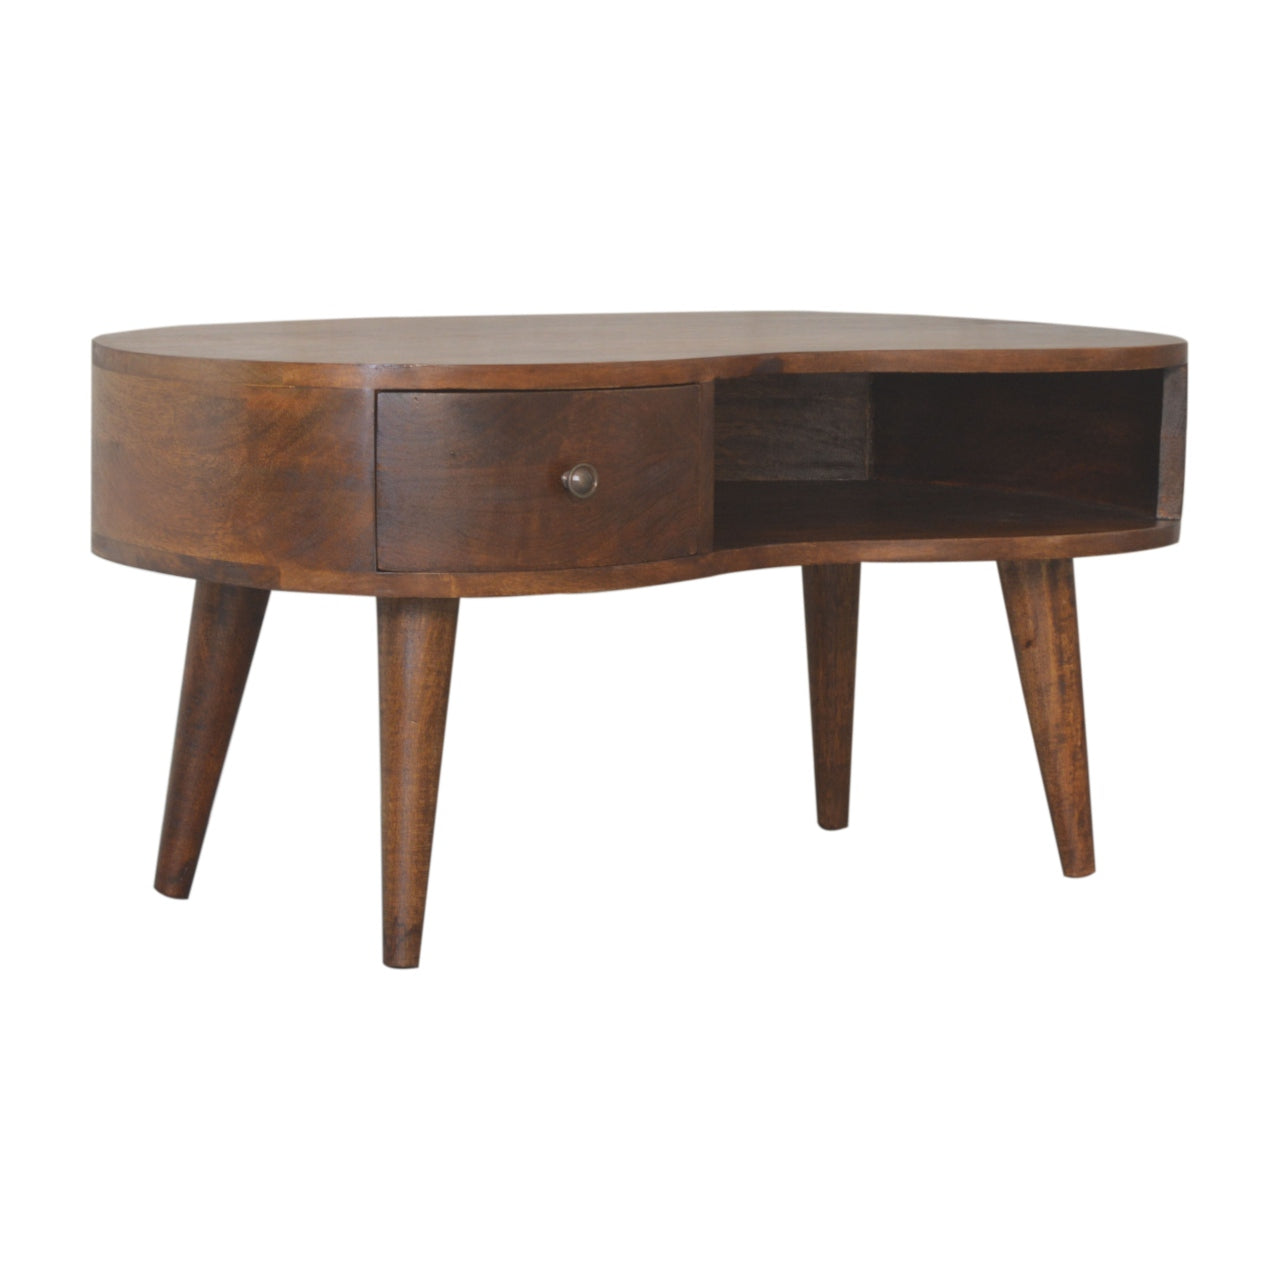 Solid Wood Curved Chestnut Coffee Table